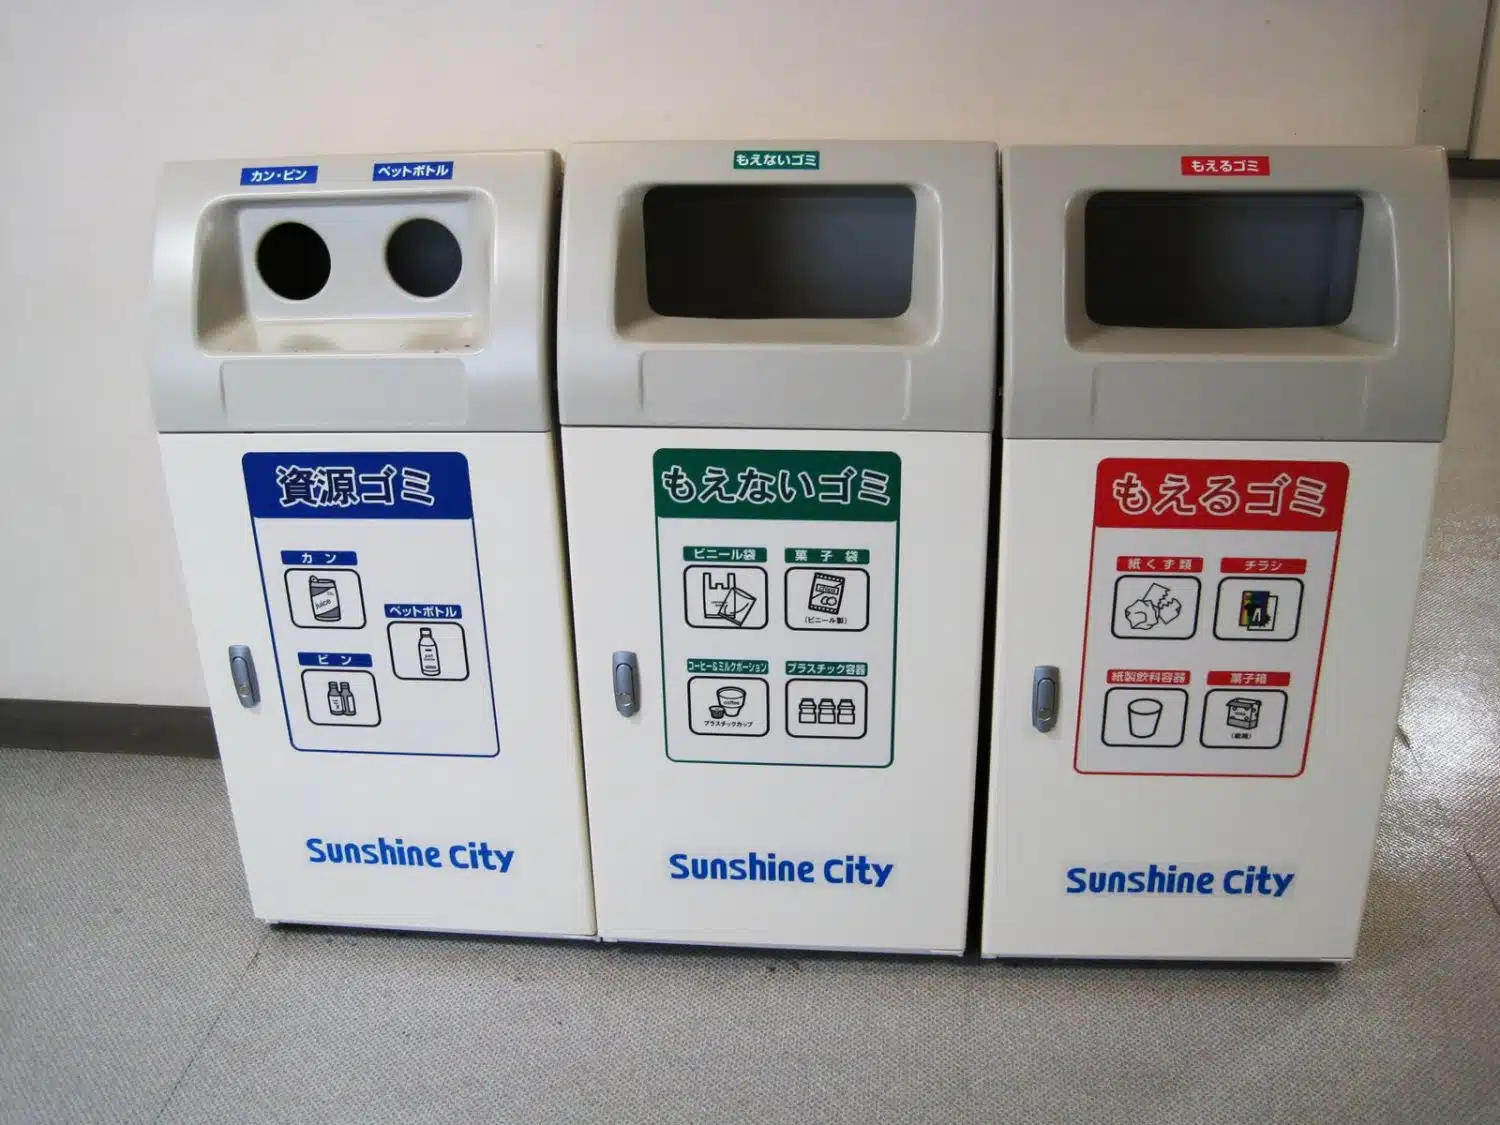 Trash and recycling sorting in Japan.